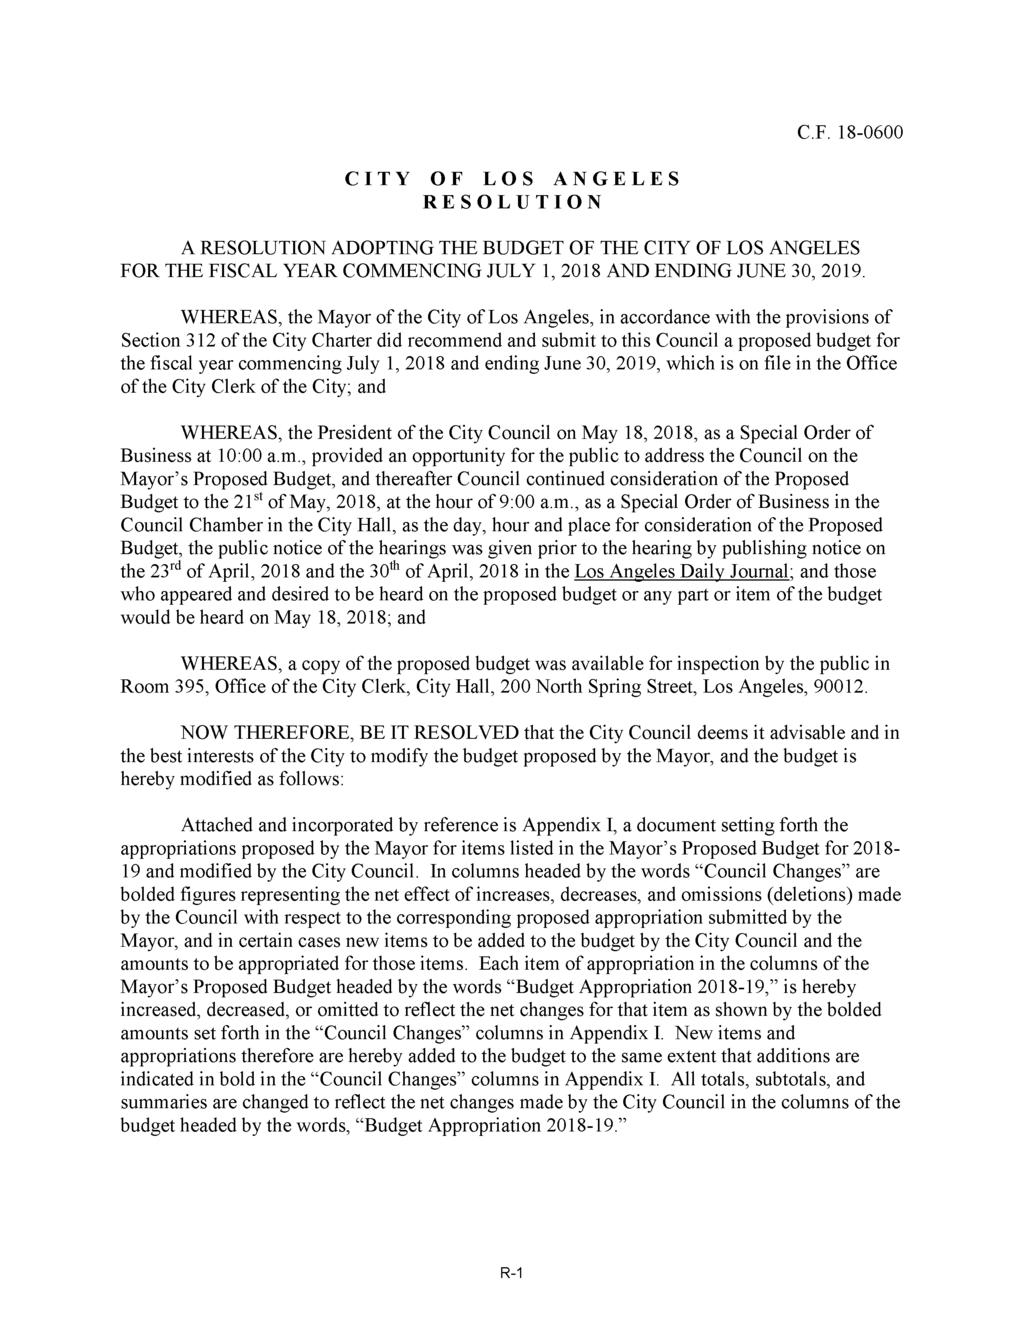 C.F.18-0600 C I T Y O F L O S A N G E L E S R E S O L U T I O N A RESOLUTION ADOPTING THE BUDGET OF THE CITY OF LOS ANGELES FOR THE FISCAL YEAR COMMENCING JULY 1, 2018 AND ENDING JUNE 30, 2019.